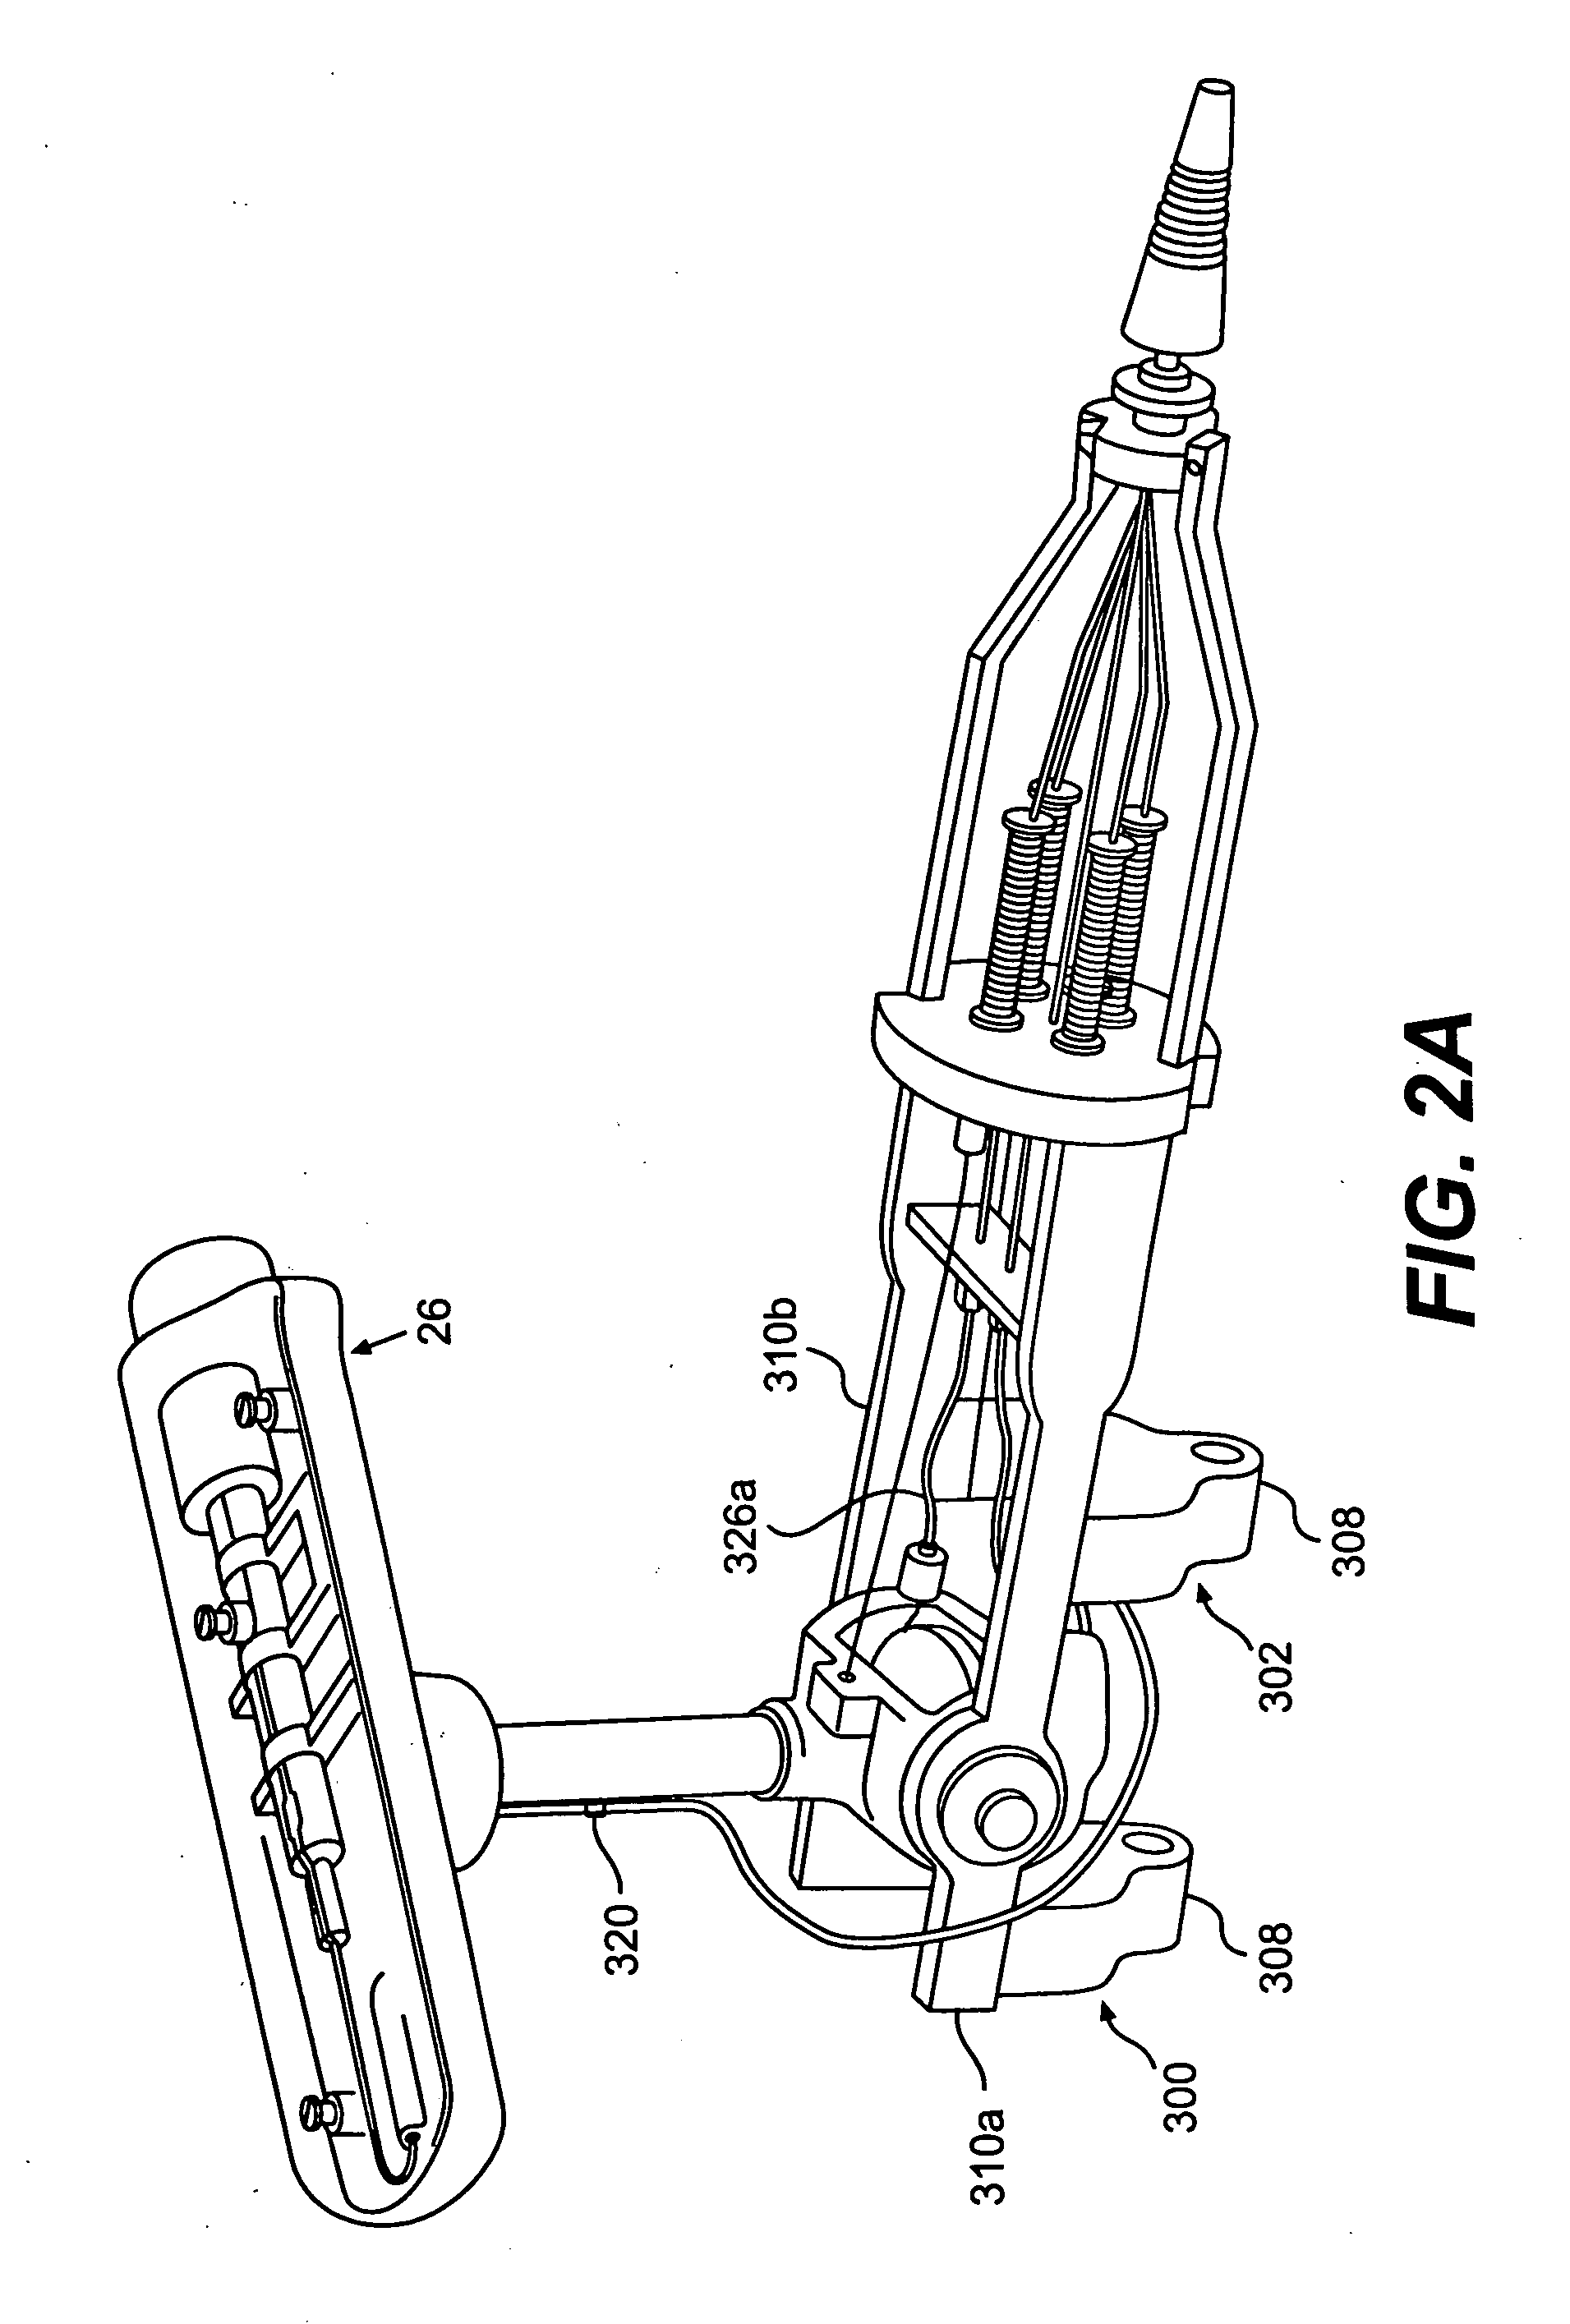 Drive systems and methods of use